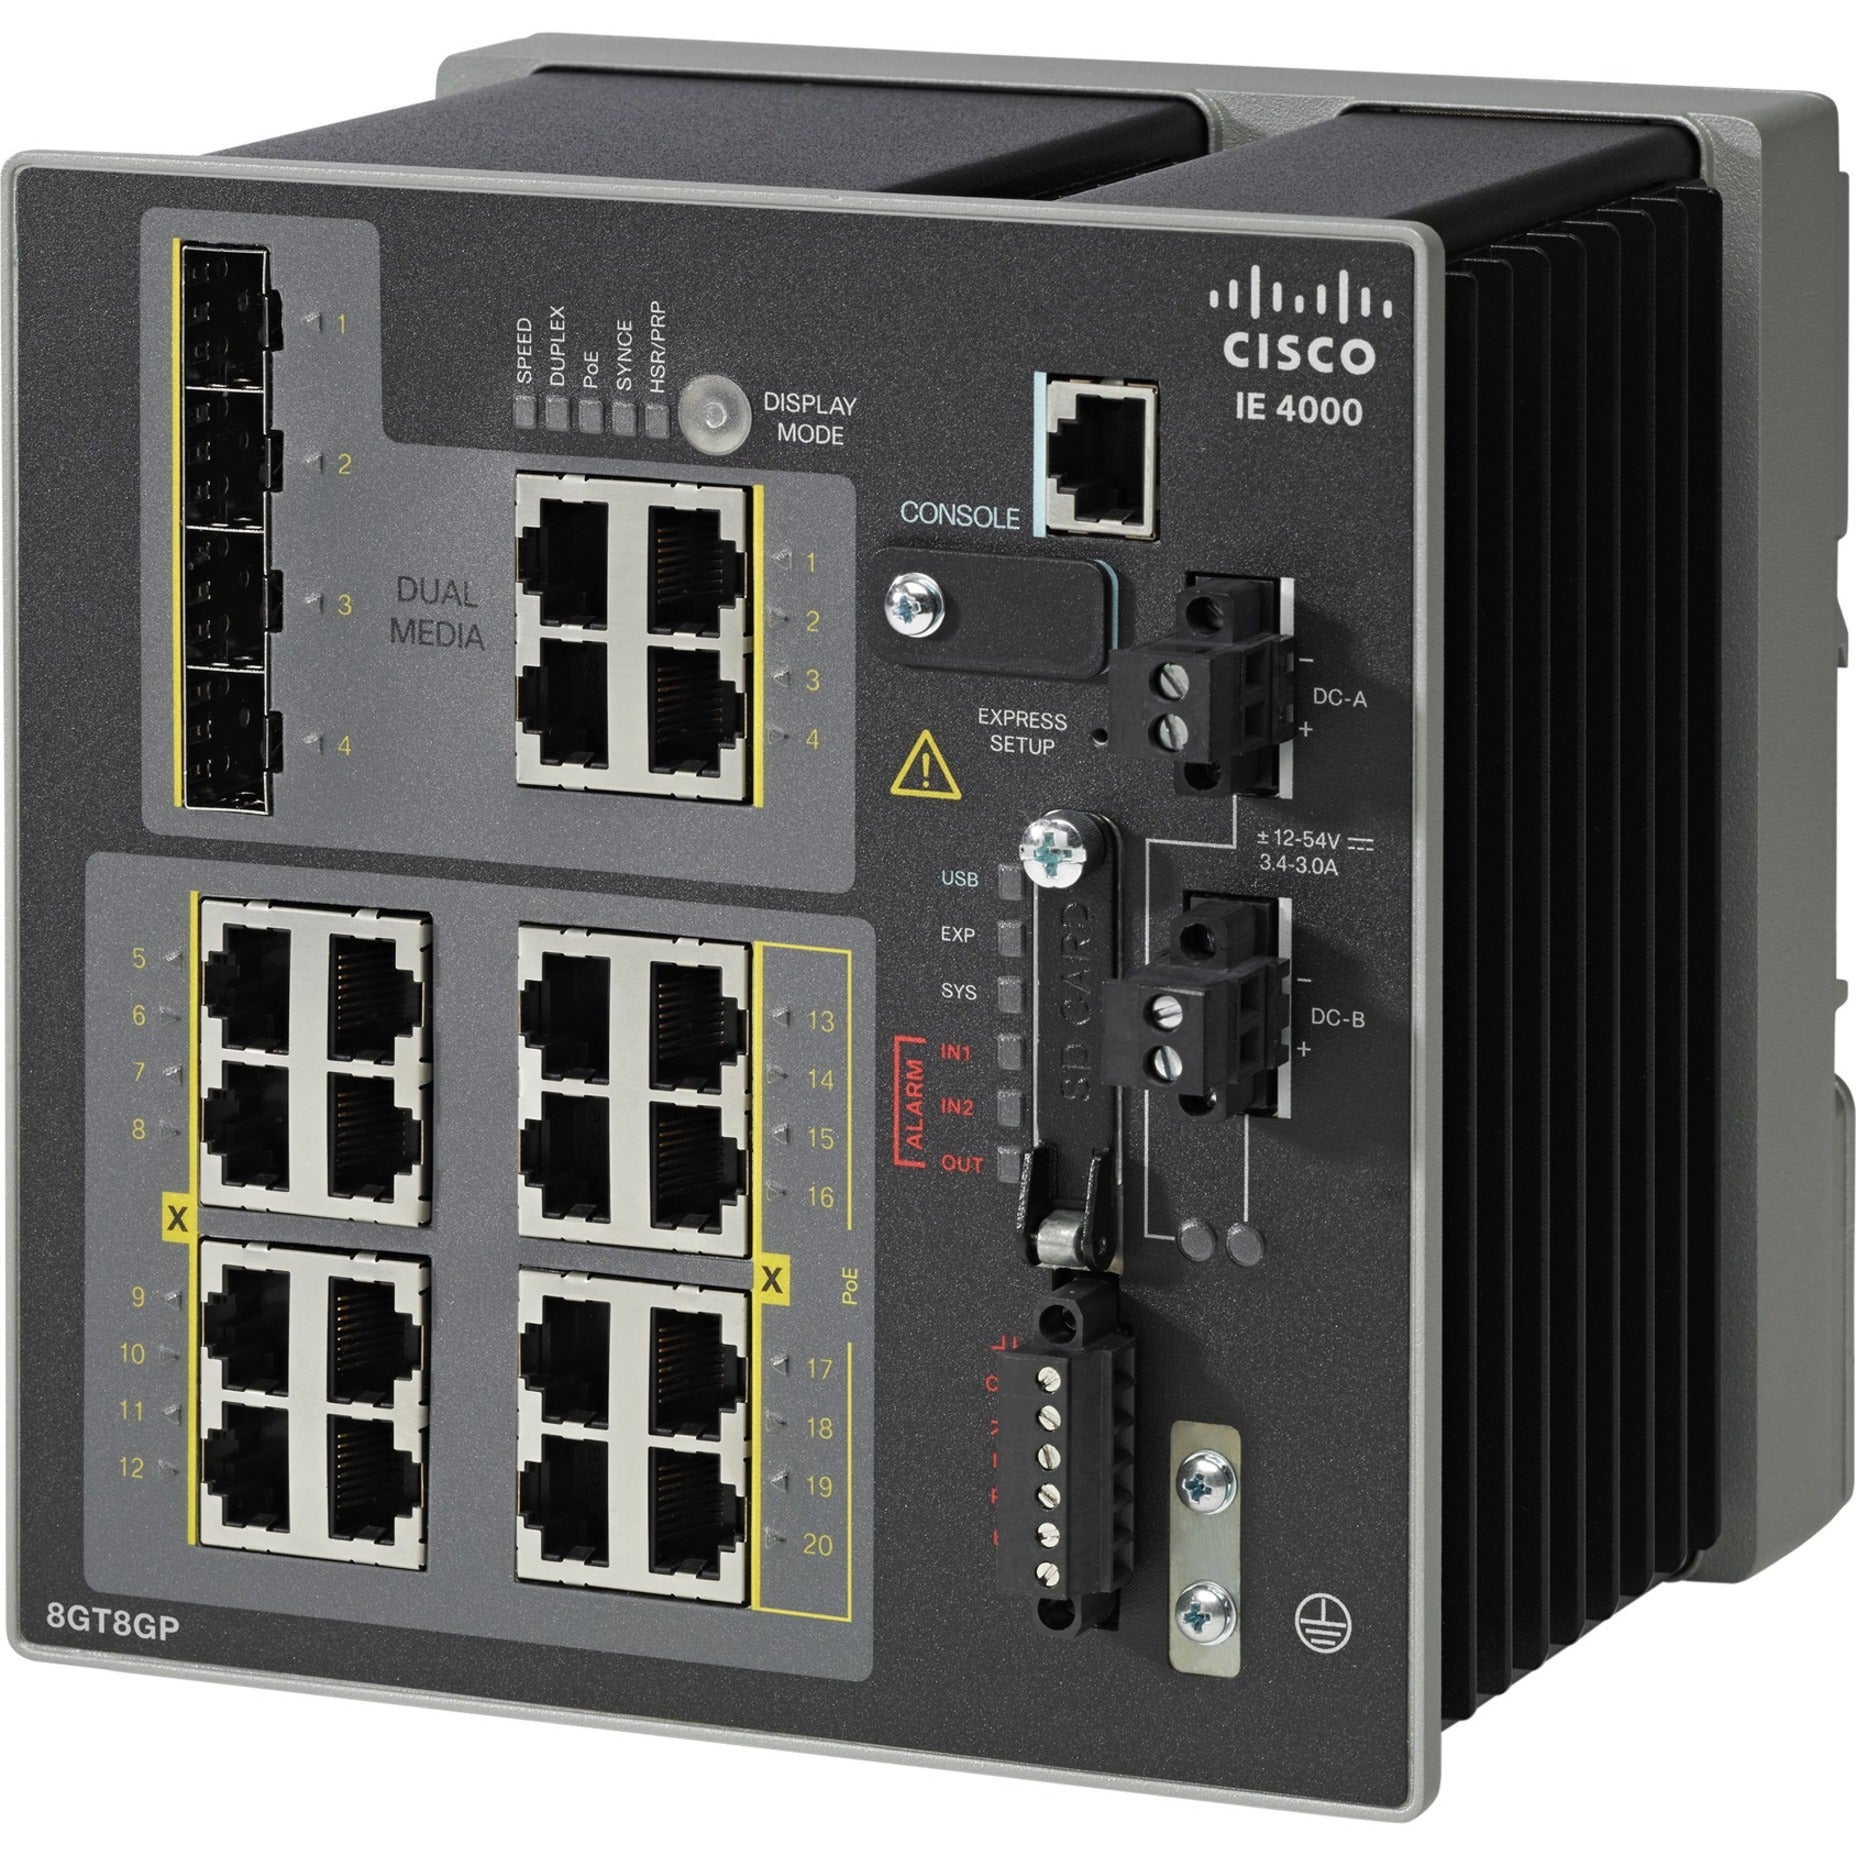 Cisco IE-4000-8GT8GP4G-E Industrial Ethernet Switch, 8 x RJ45 10/100/1000 with 8 x 1G, DIN Rail Mountable, Rack-mountable